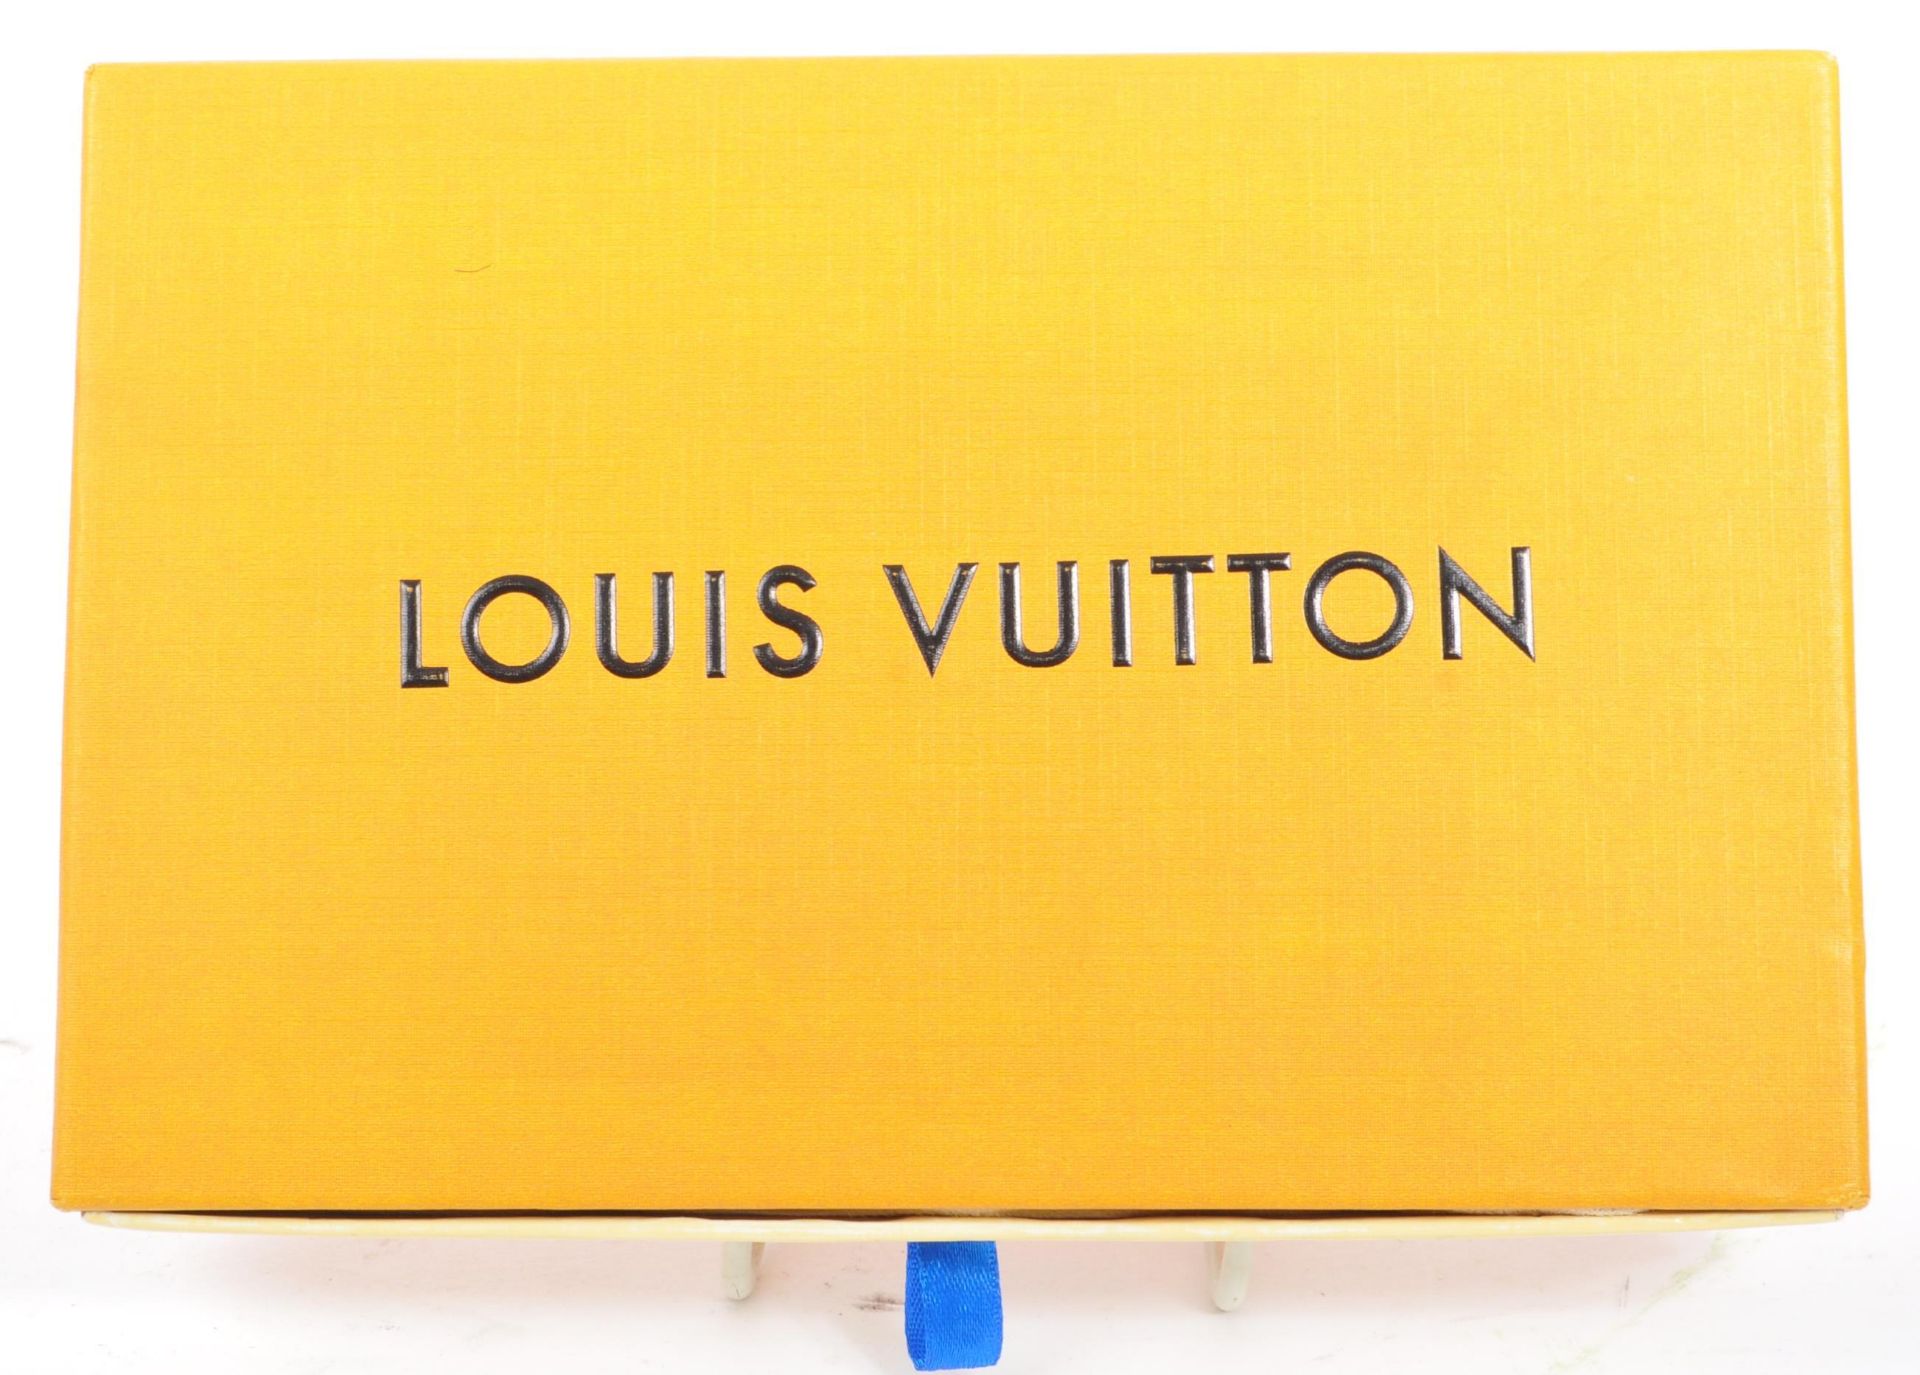 LOUIS VUITTON X SUPREME RED / GOLD IPHONE 7 CASE IN BOX - Image 7 of 7